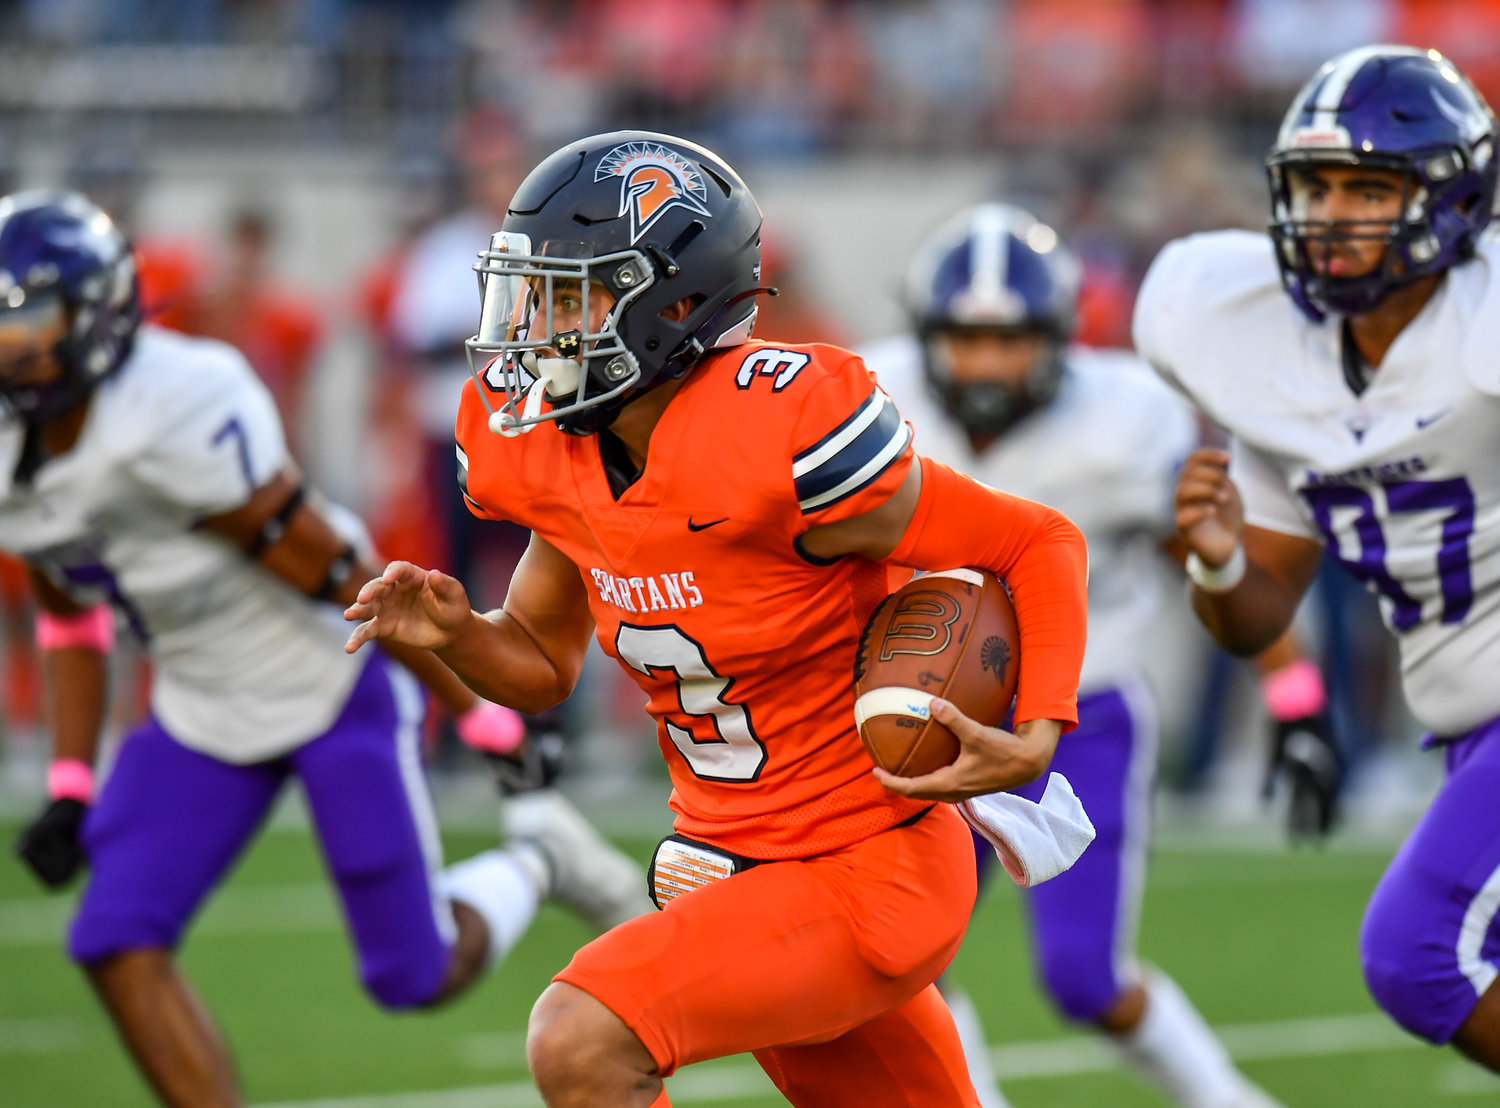 Katy, Tx. Oct 8, 2021: Seven Lakes QB Grayson Medford #3 carries the ball to the outside during a District 19-6A game between Seven Lakes and Morton Ranch at Legacy Stadium in Katy. (Photo by Mark Goodman / Katy Times)